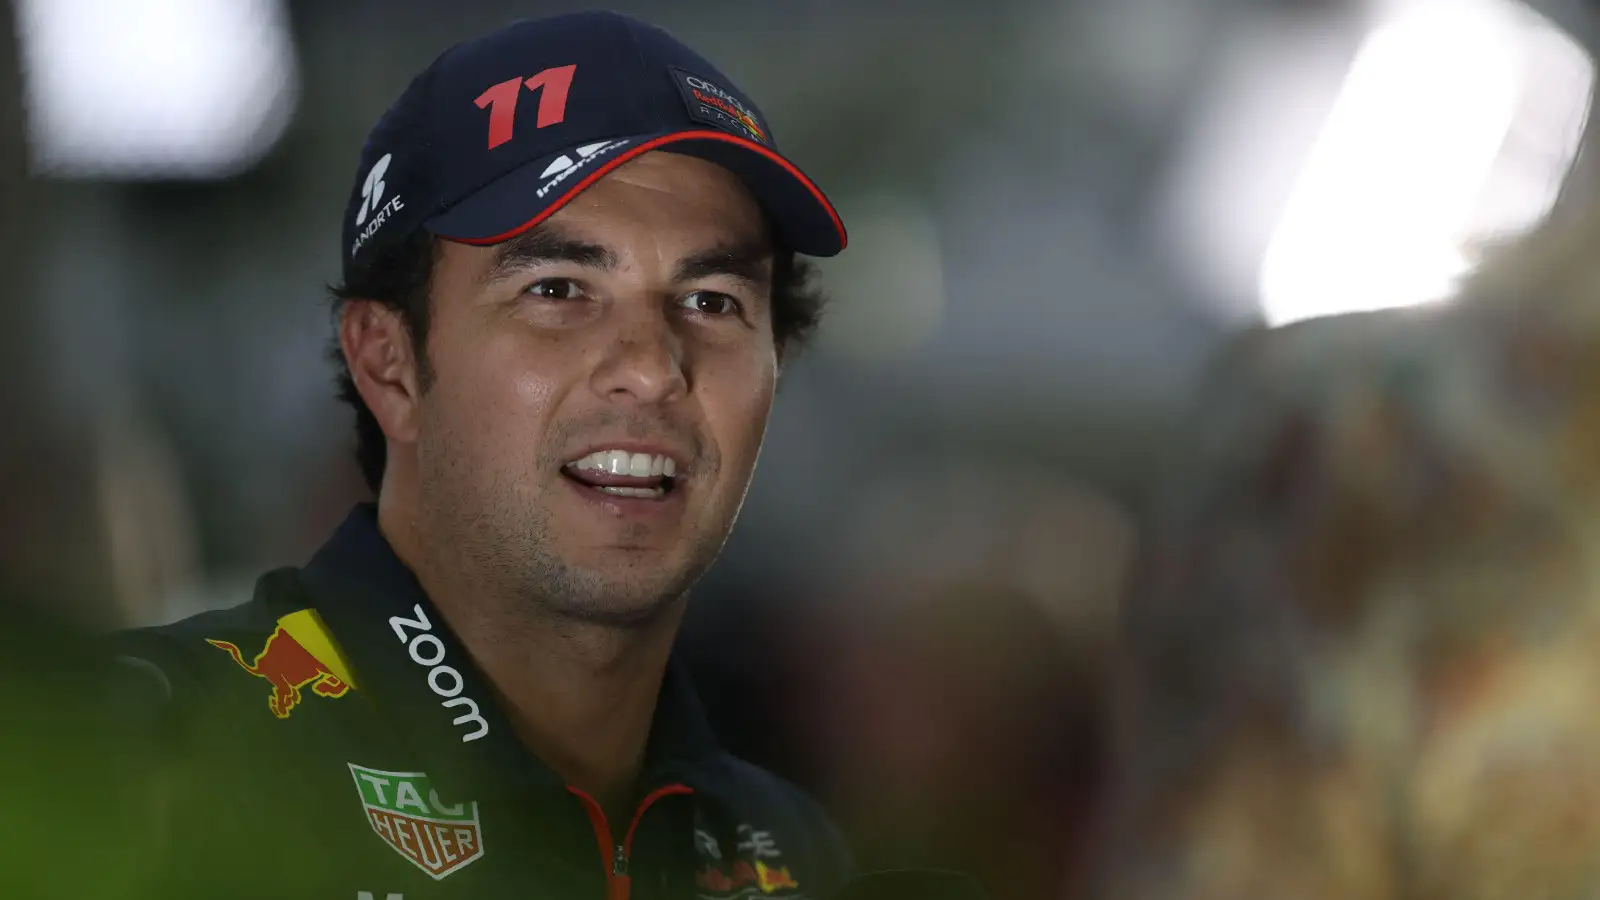 Red Bull's Sergio Perez pictured during the Singapore Grand Prix weekend.